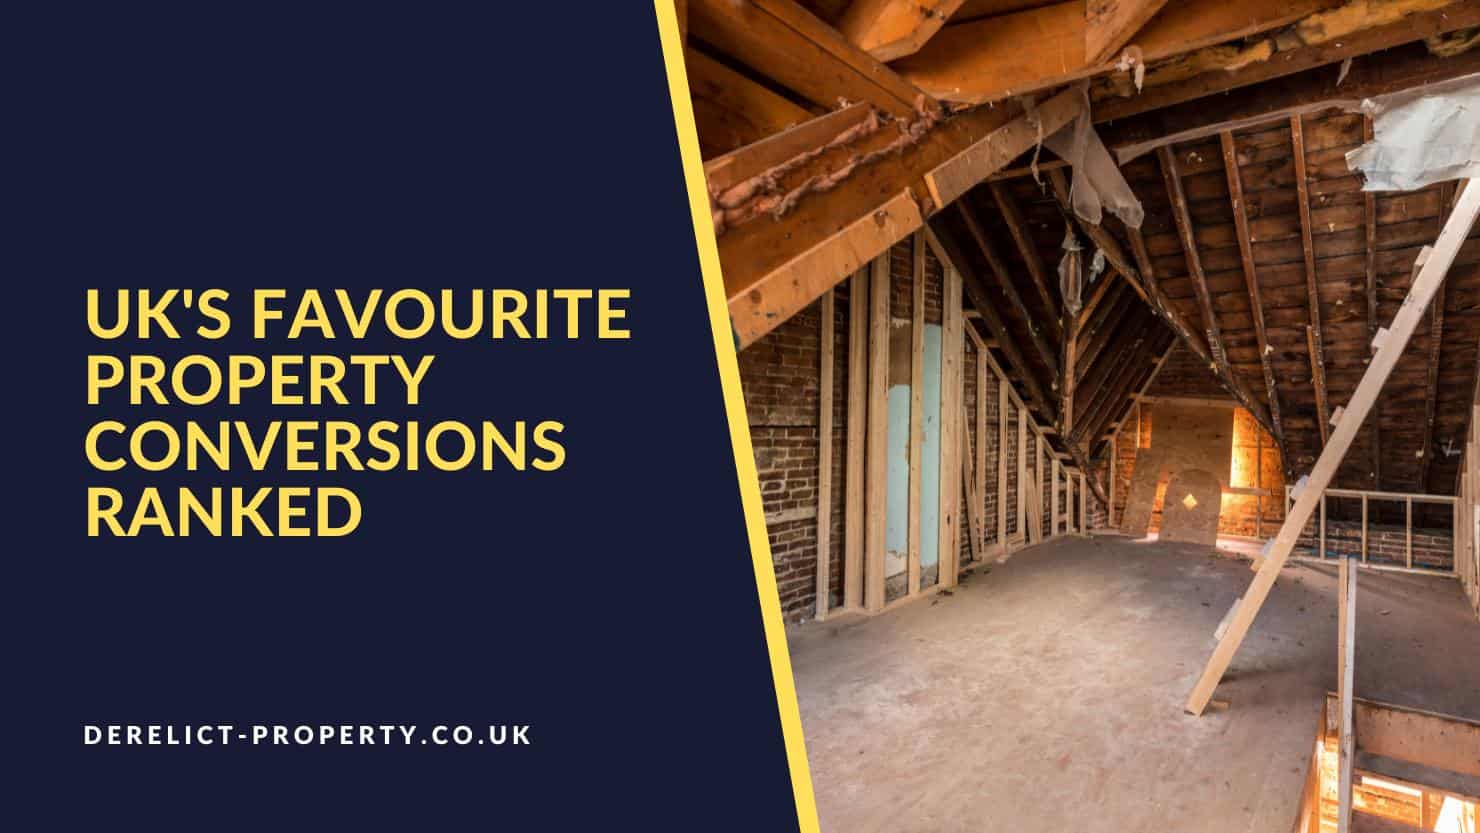 UK's favourite property conversions ranked